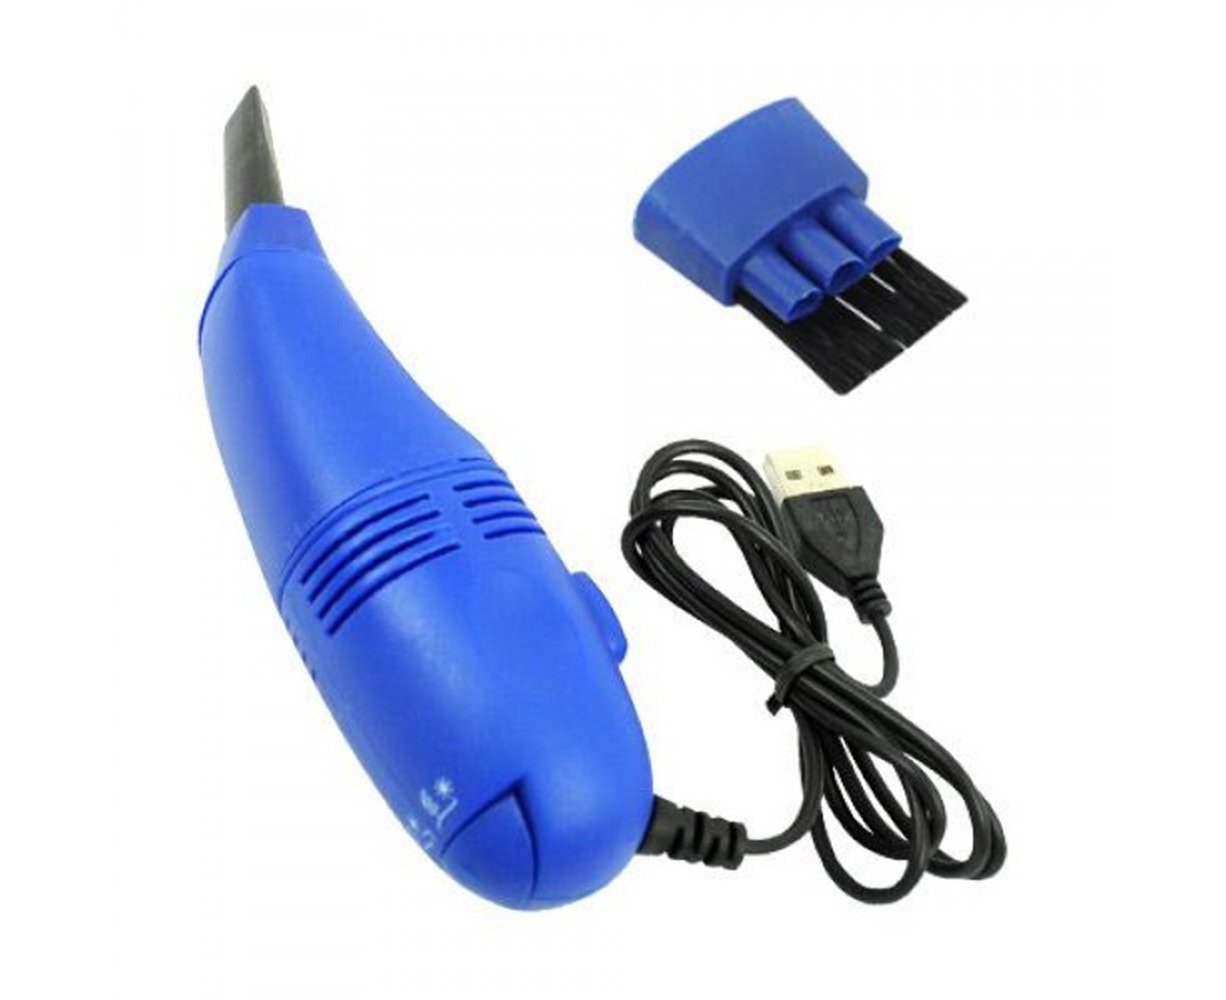 TOPINCN Portable Computer Keyboard Cleaner Mini USB Rechargeable Handheld Desk Vacuum Cleaner for Dust Scraps Cleaning Blue 